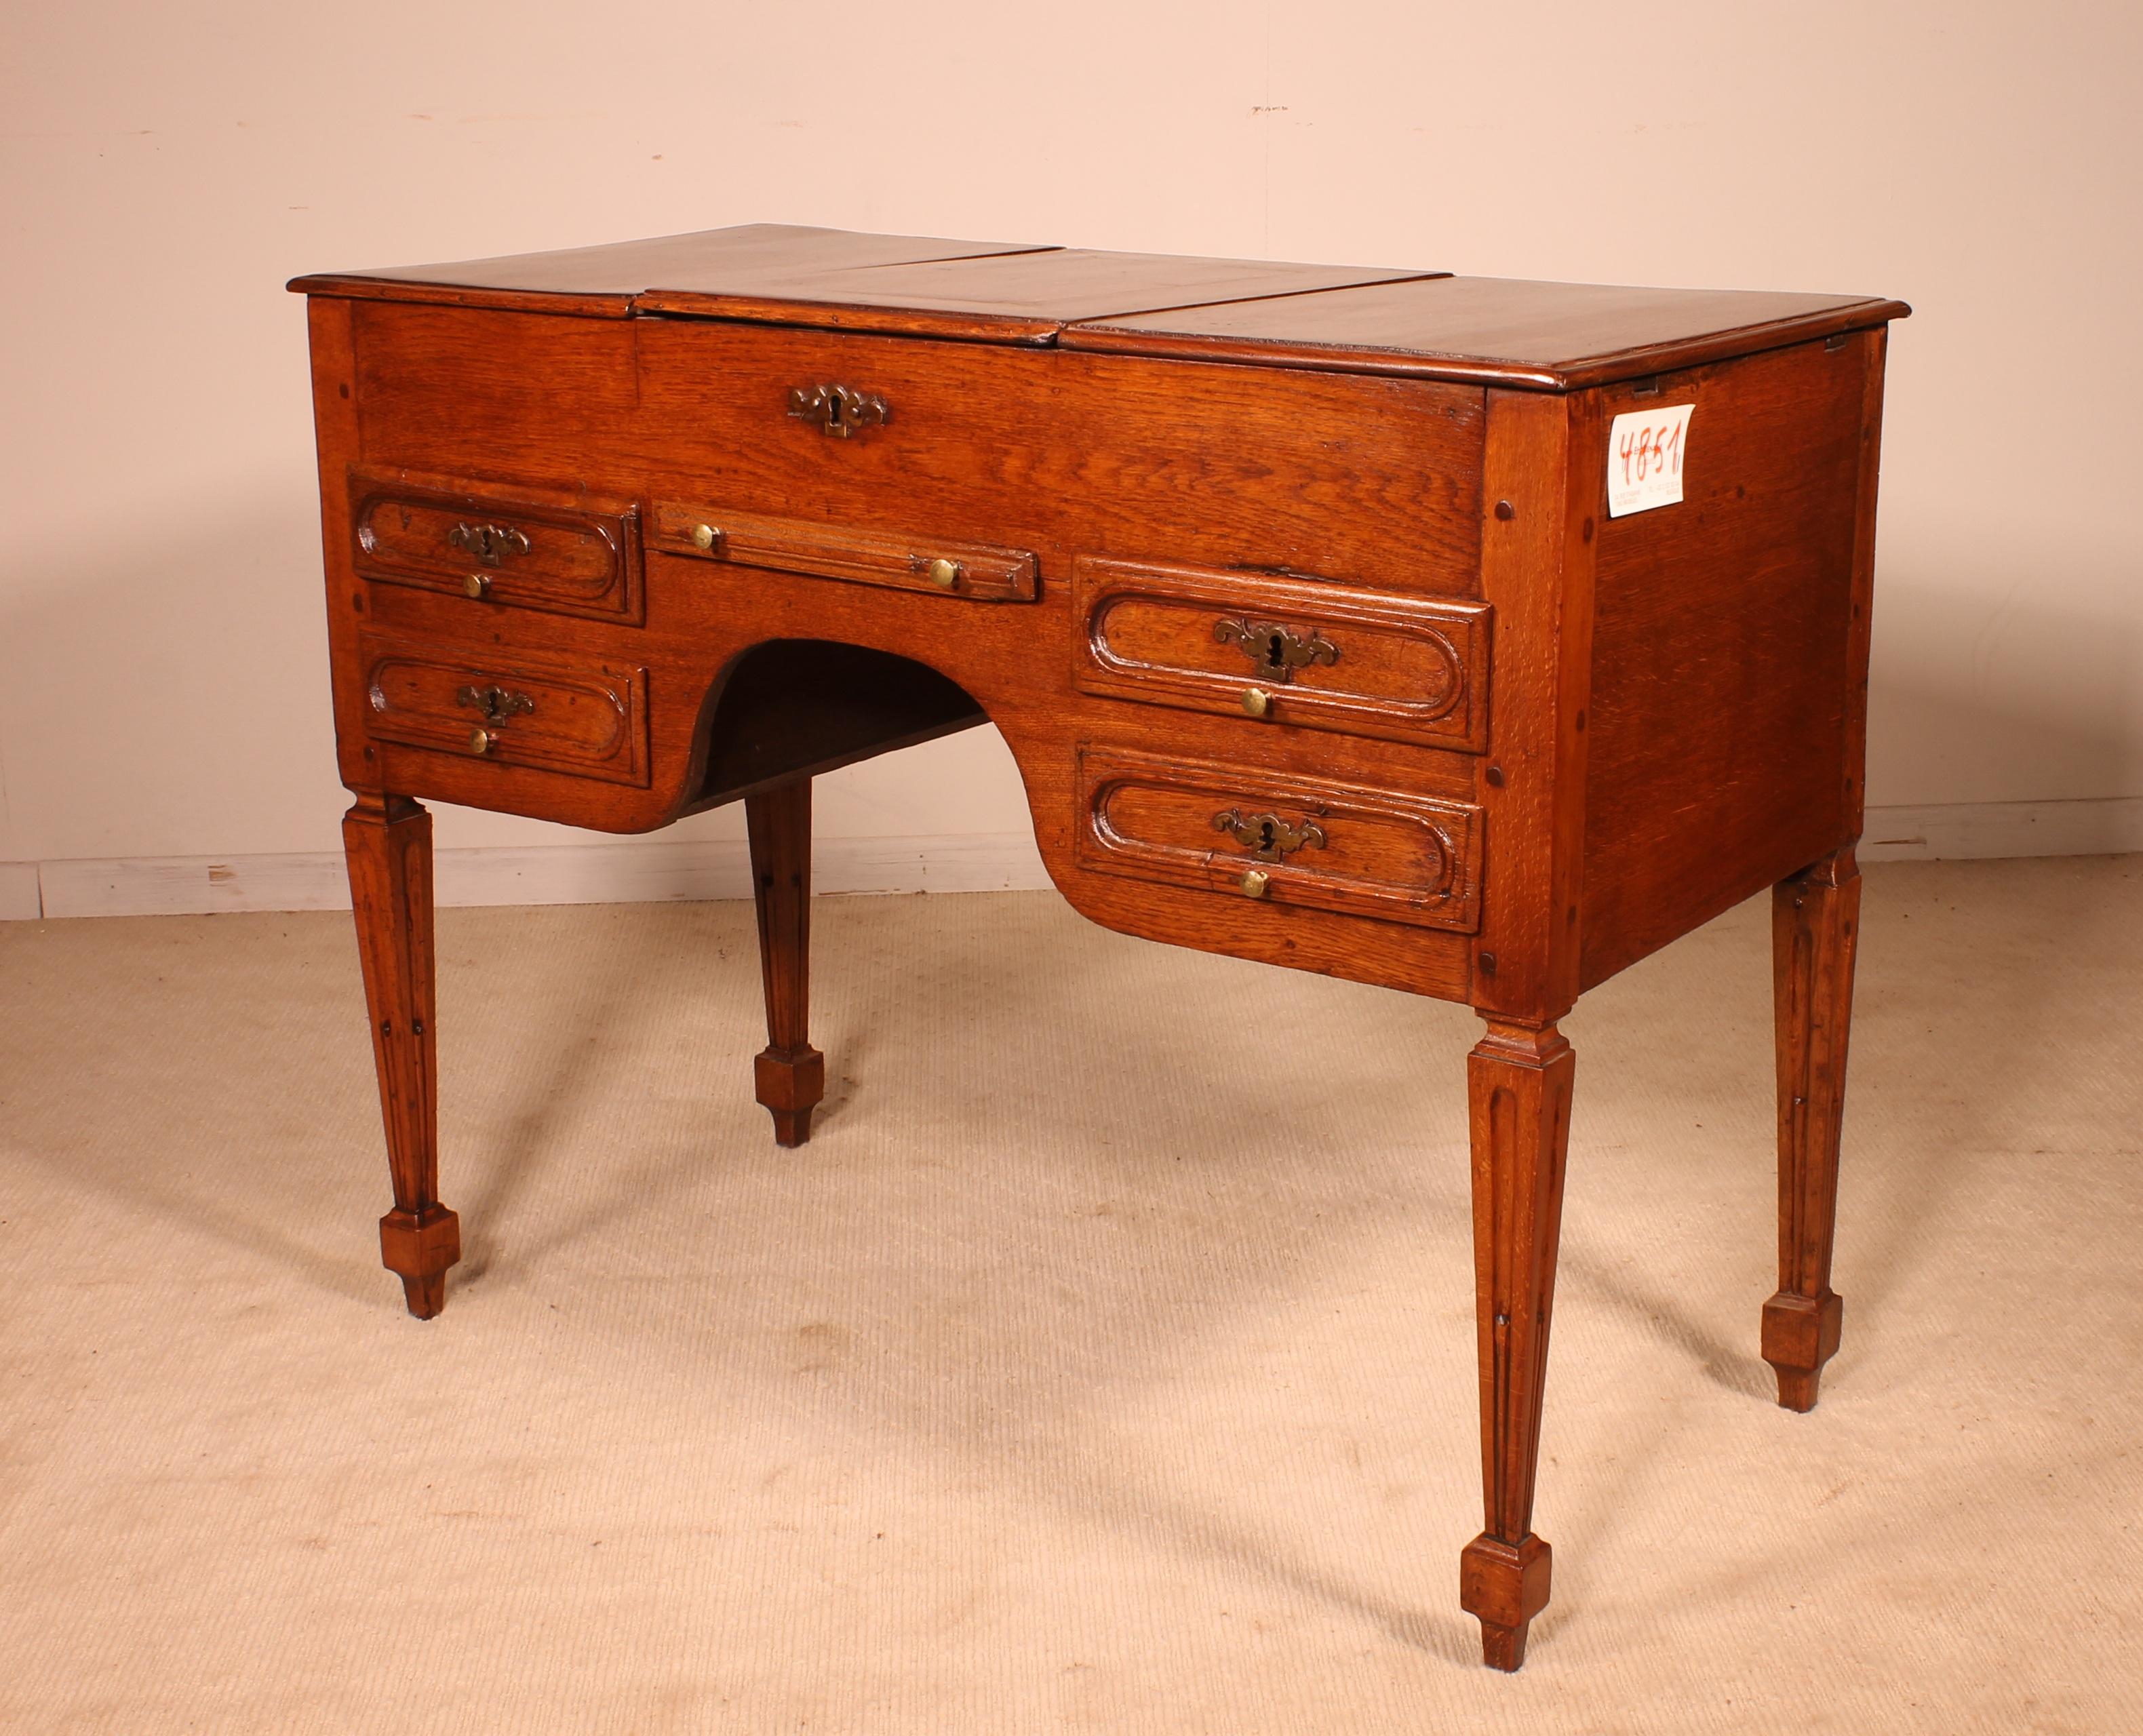 A rare antique Louis XVI oak dressing table,
Lovely piece in very good condition. The top flaps open to reveal 3 sections. On the lower section of the piece, we can find four small shaped drawers with original turned knobs.
Lovely carved Louis XVI